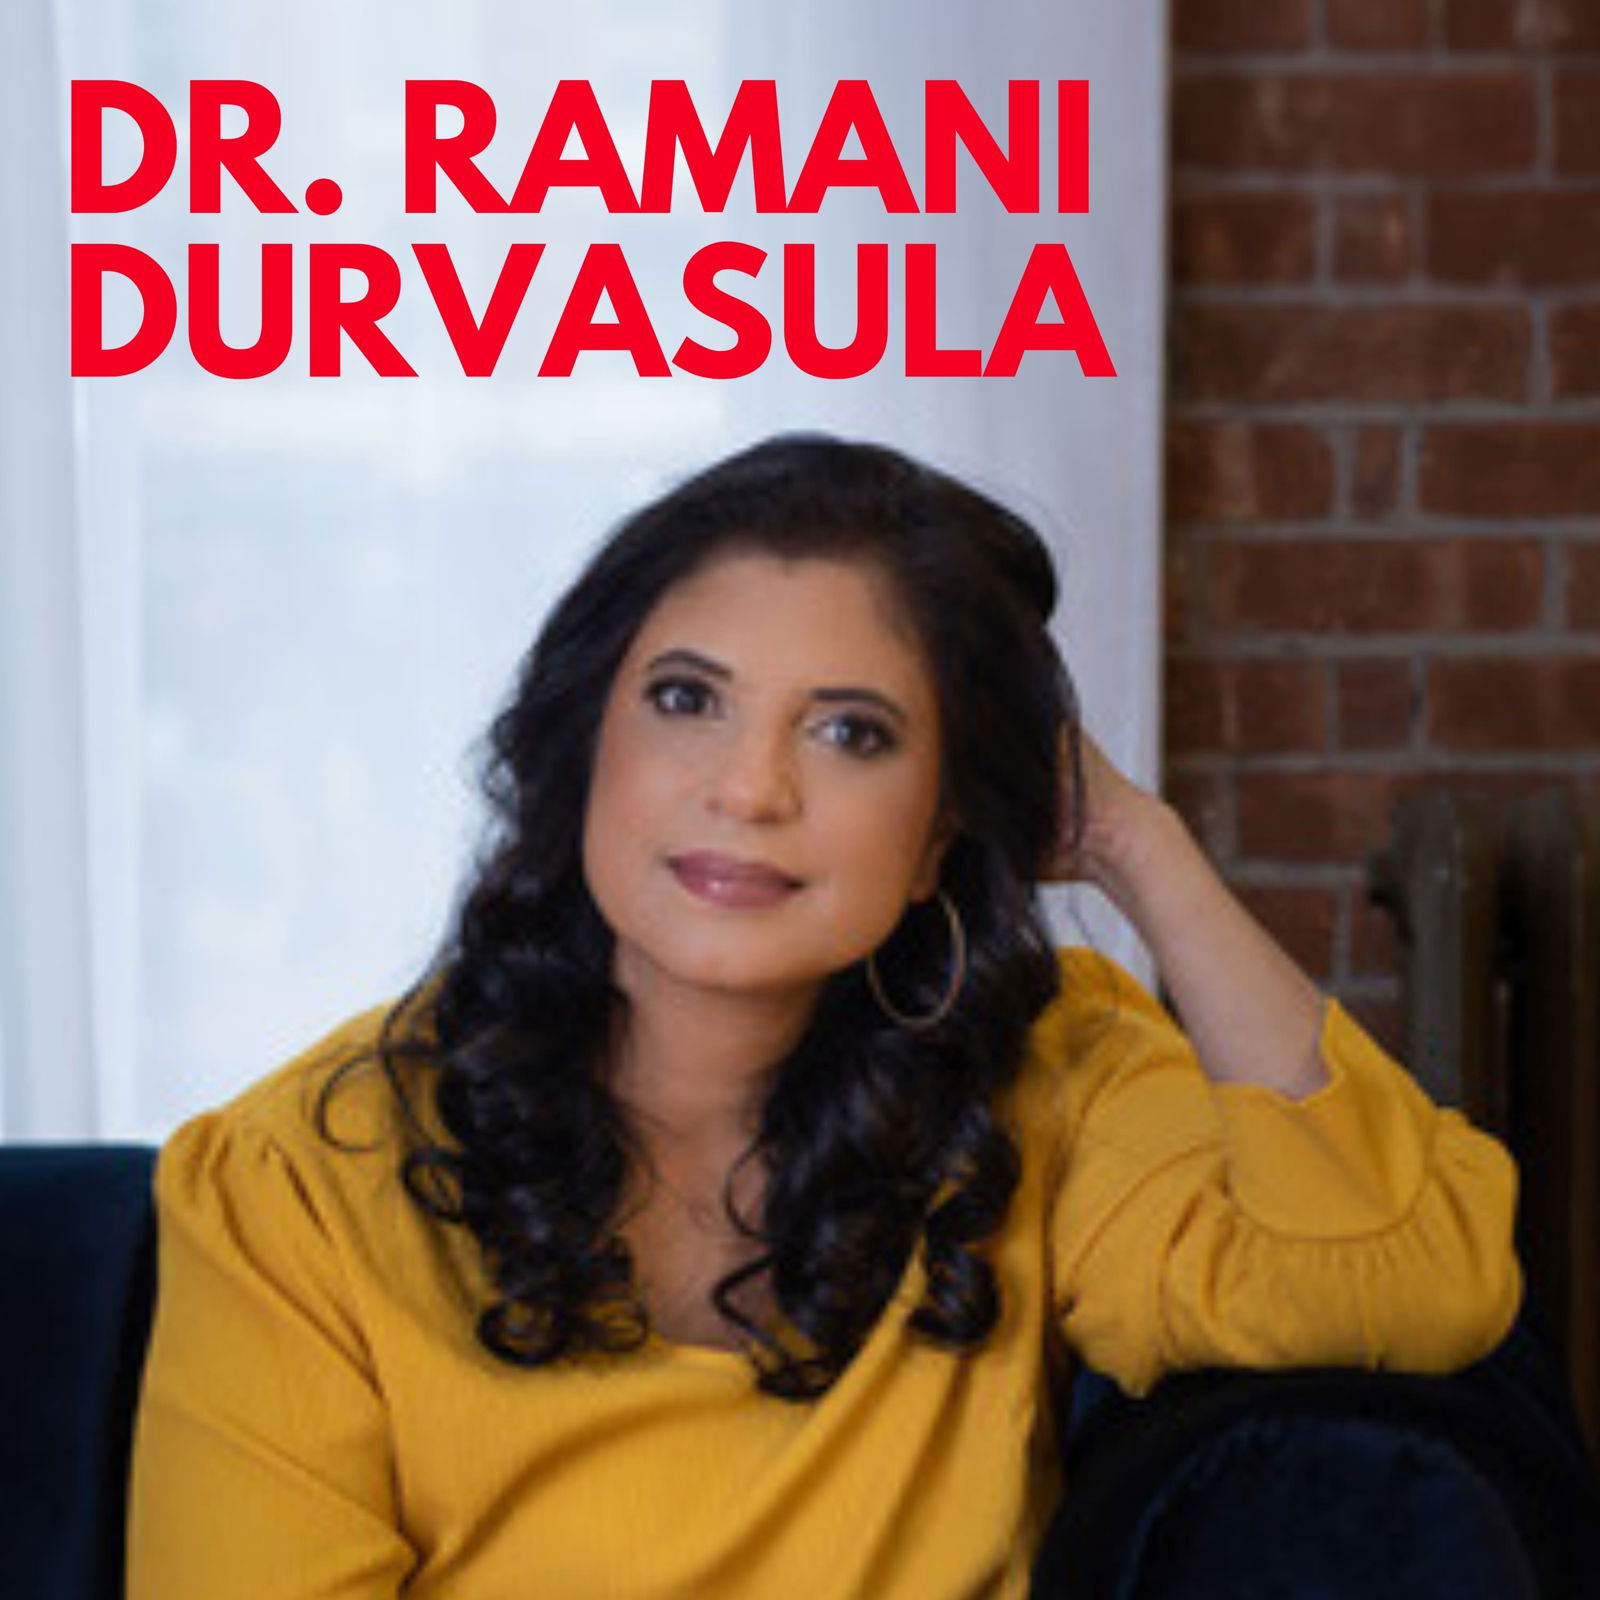 178. Spotting a Narcissist with Dr. Ramani: 4 Ways to Set Boundaries